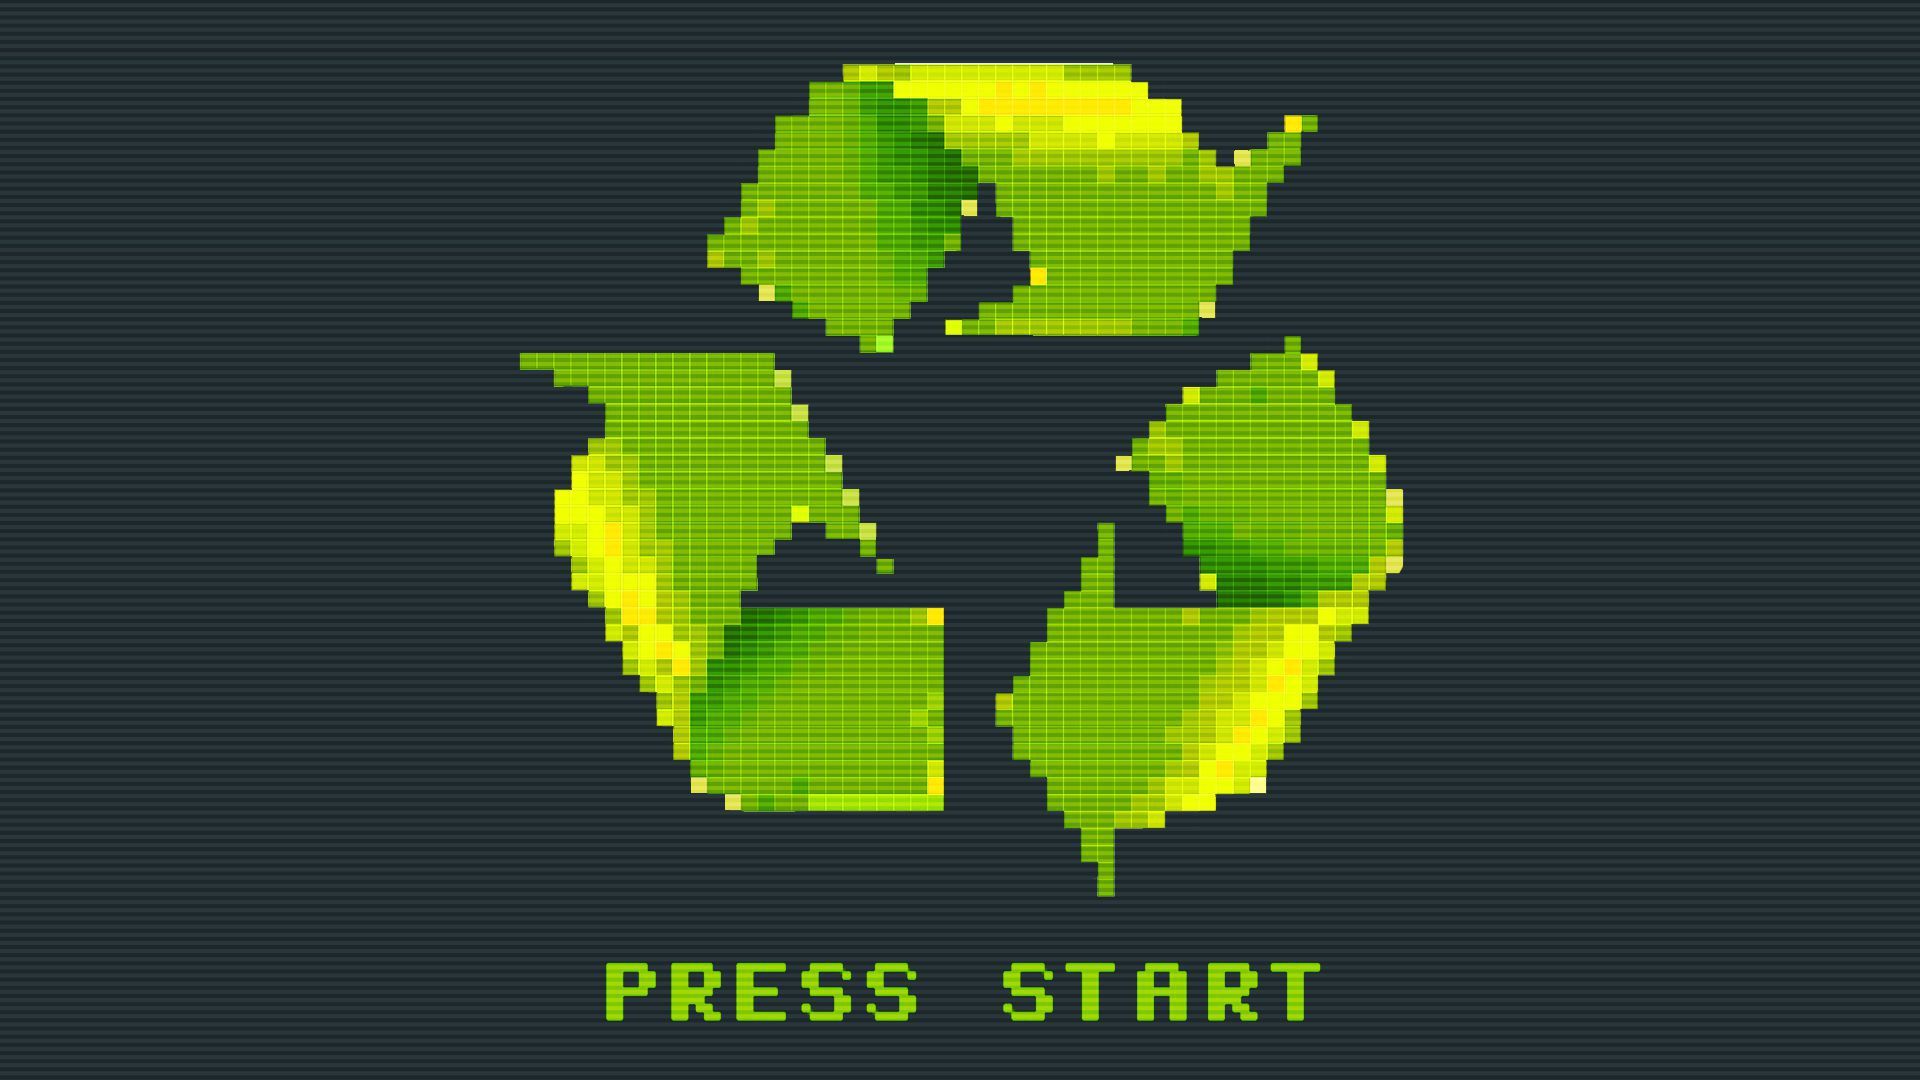 Recycle Icon pixelated to resemble old-school games.